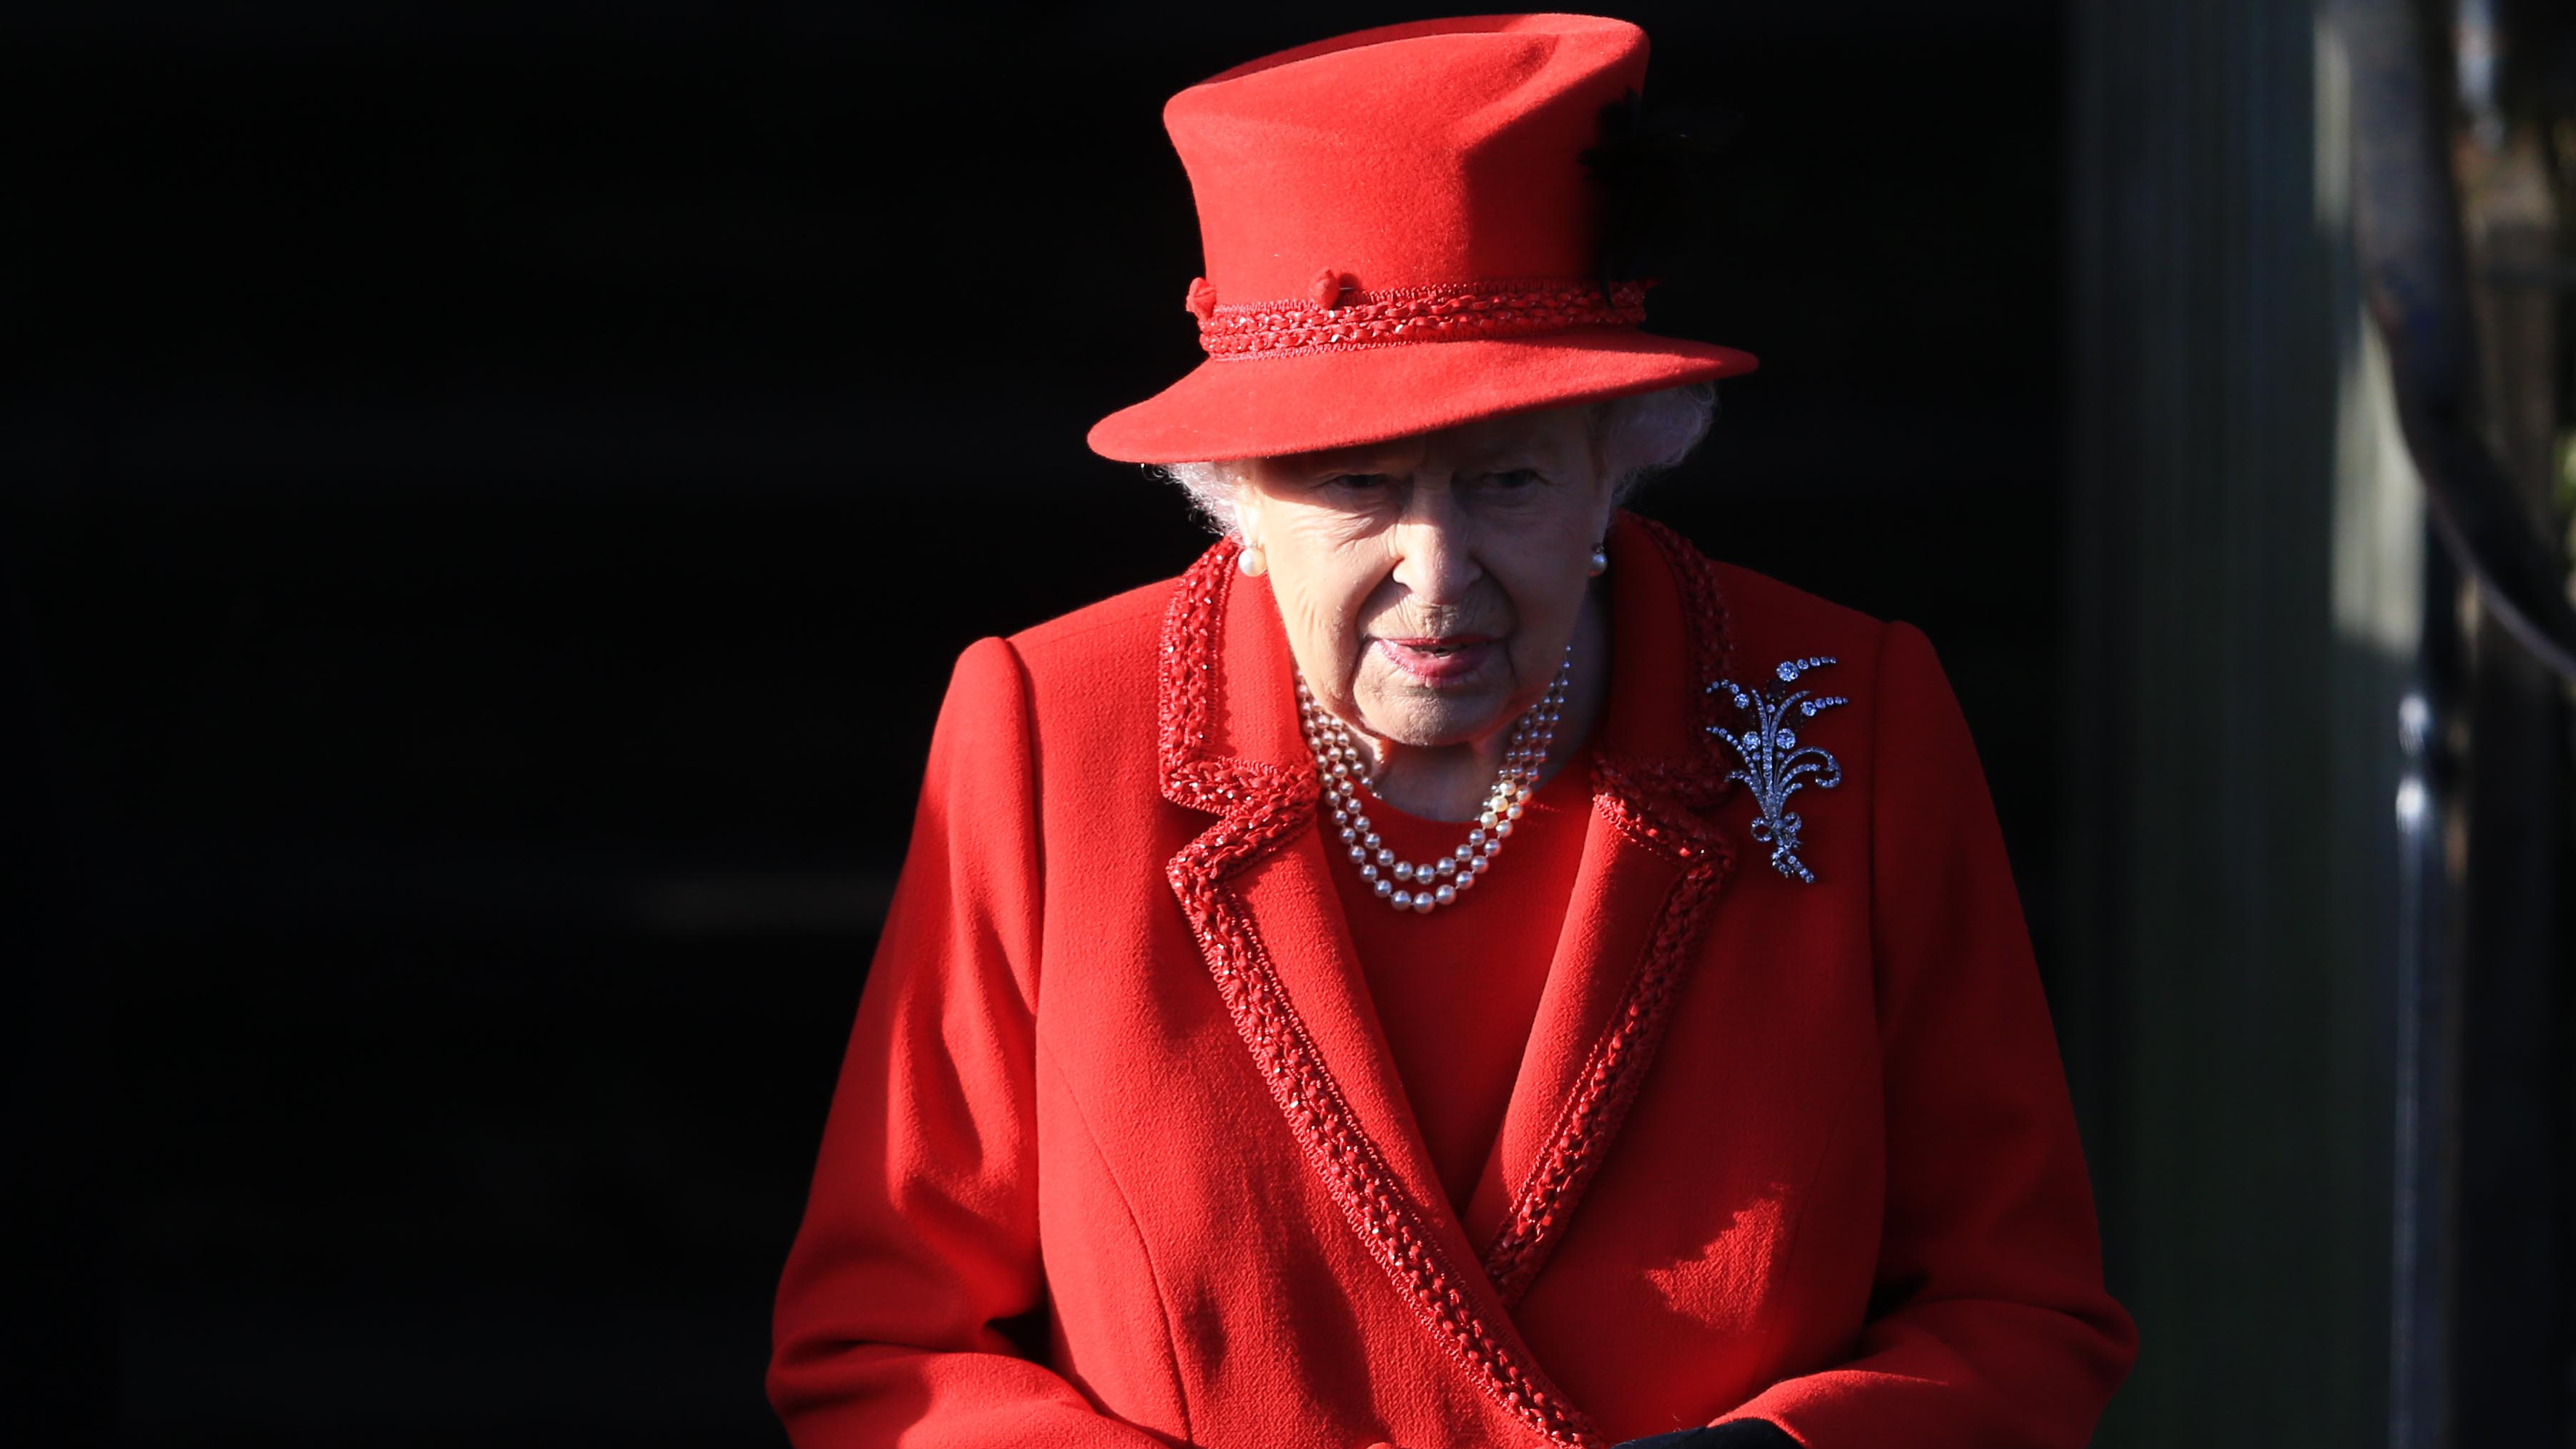 Queen Elizabeth II leaves after attending the Christmas Day Church service at Church of St Mary Magdalene on the Sandringham estate on December 25, 2019.